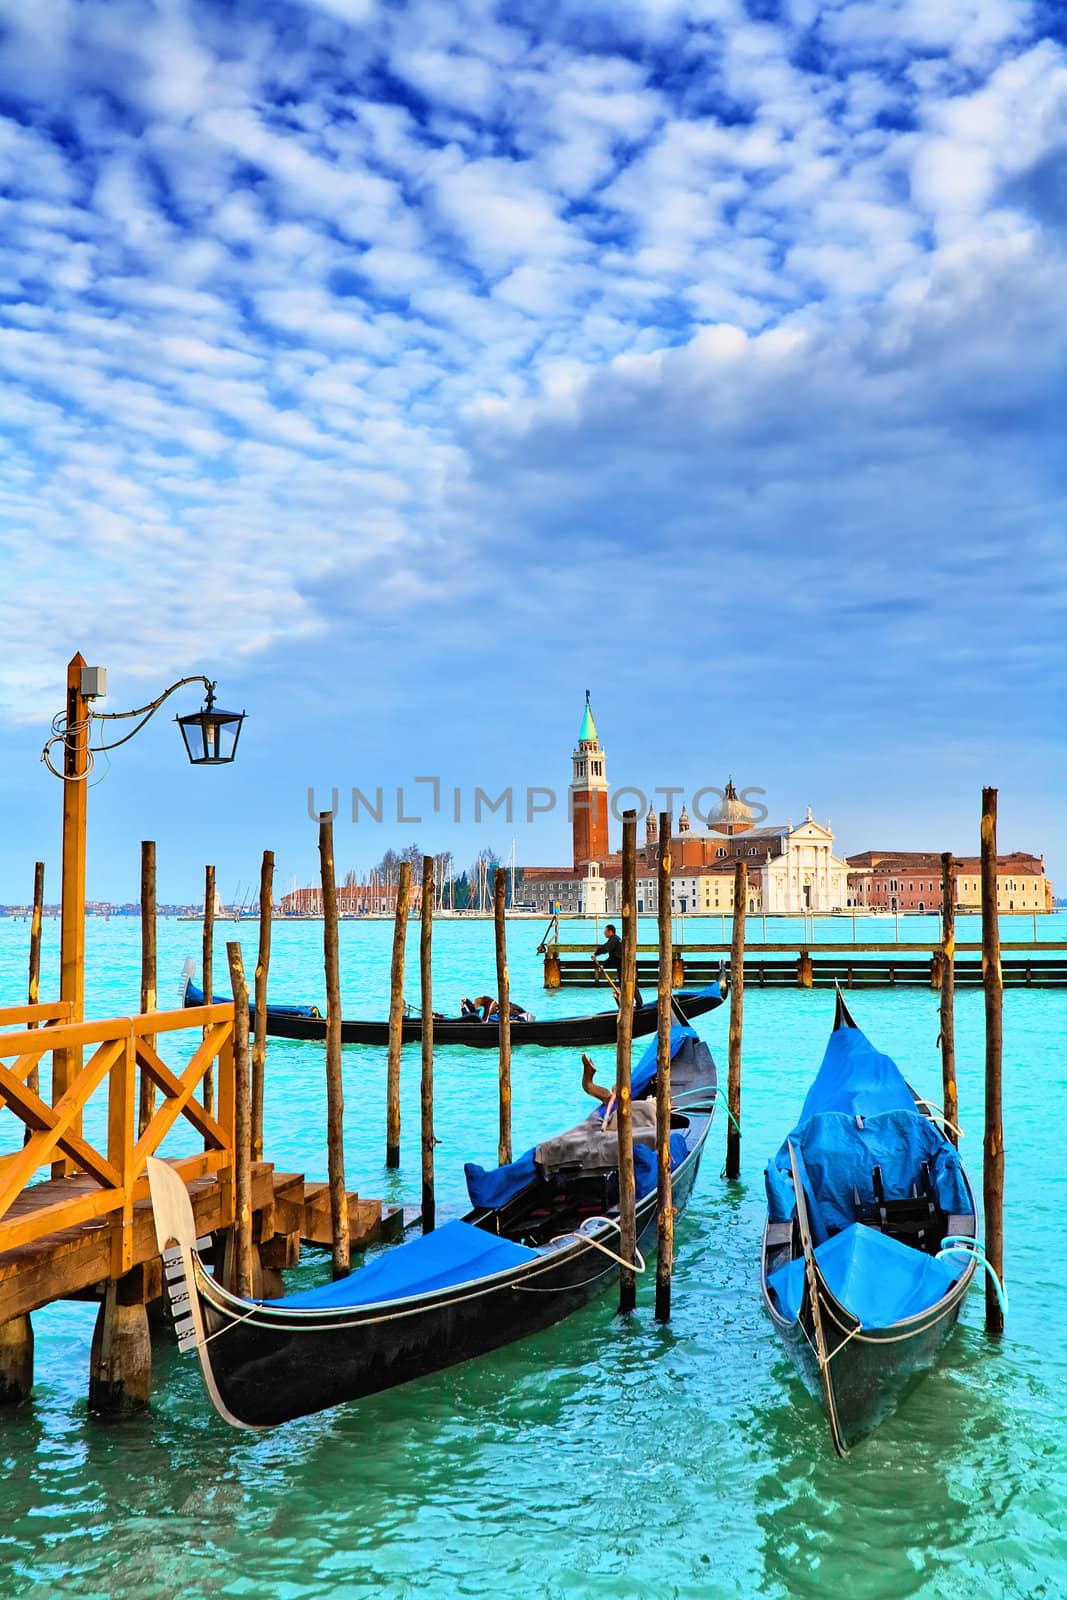  Gondolas. San Giorgio Maggiore. Venice. Venice is a city in northeast Italy which is renowned for the beauty of its setting, its architecture and its artworks. It is the capital of the Veneto region.